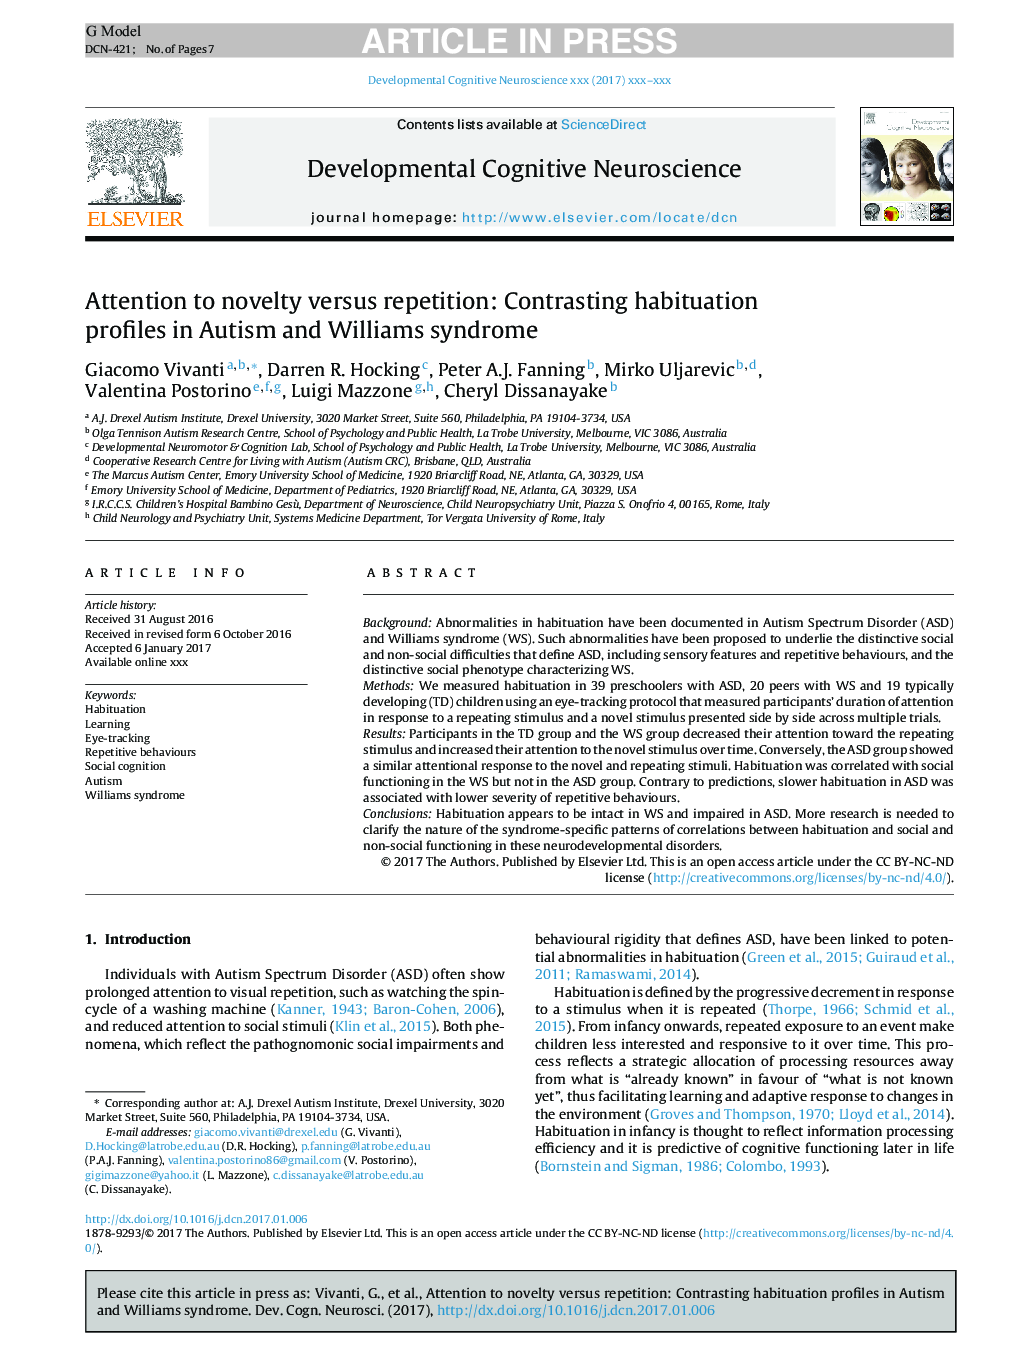 Attention to novelty versus repetition: Contrasting habituation profiles in Autism and Williams syndrome